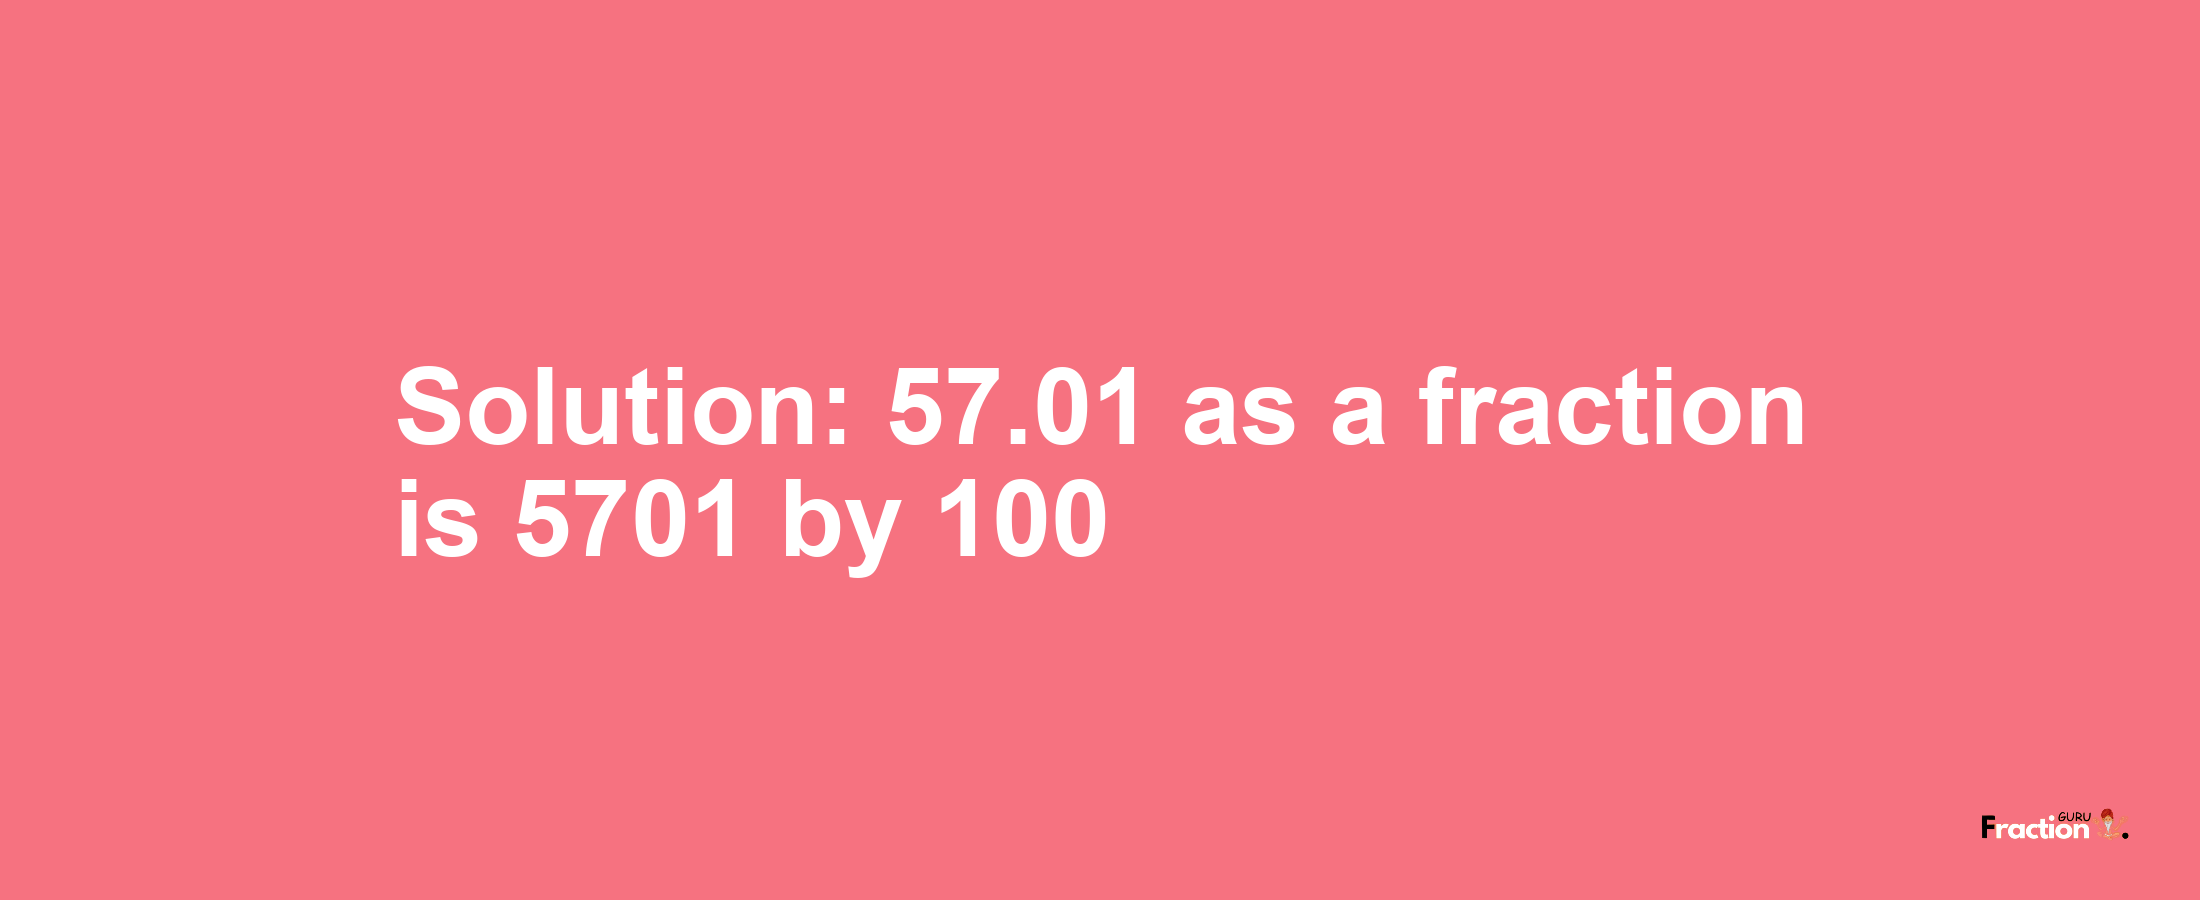 Solution:57.01 as a fraction is 5701/100